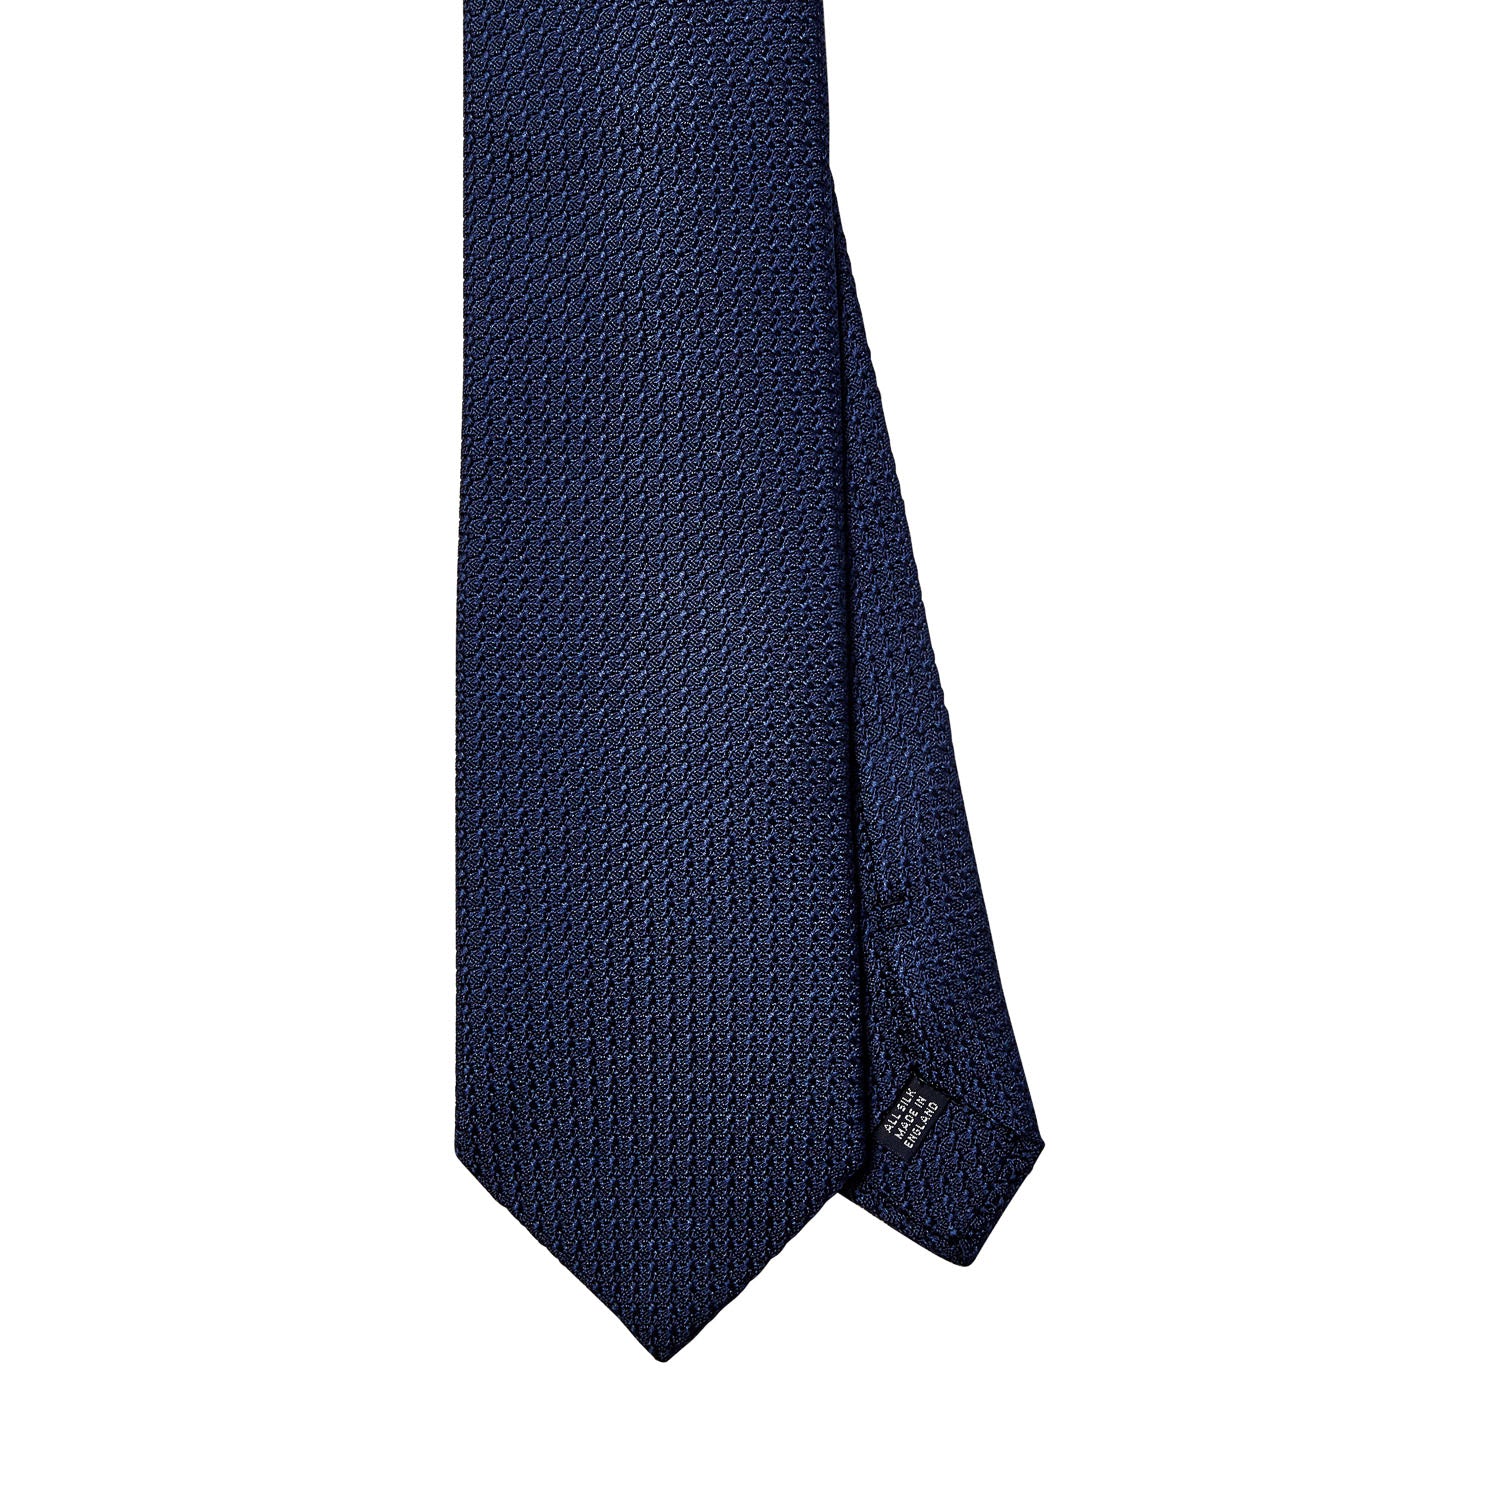 A Sovereign Grade Grenadine Grossa Navy Blue Tie with quality craftsmanship on a white background, sold by KirbyAllison.com.